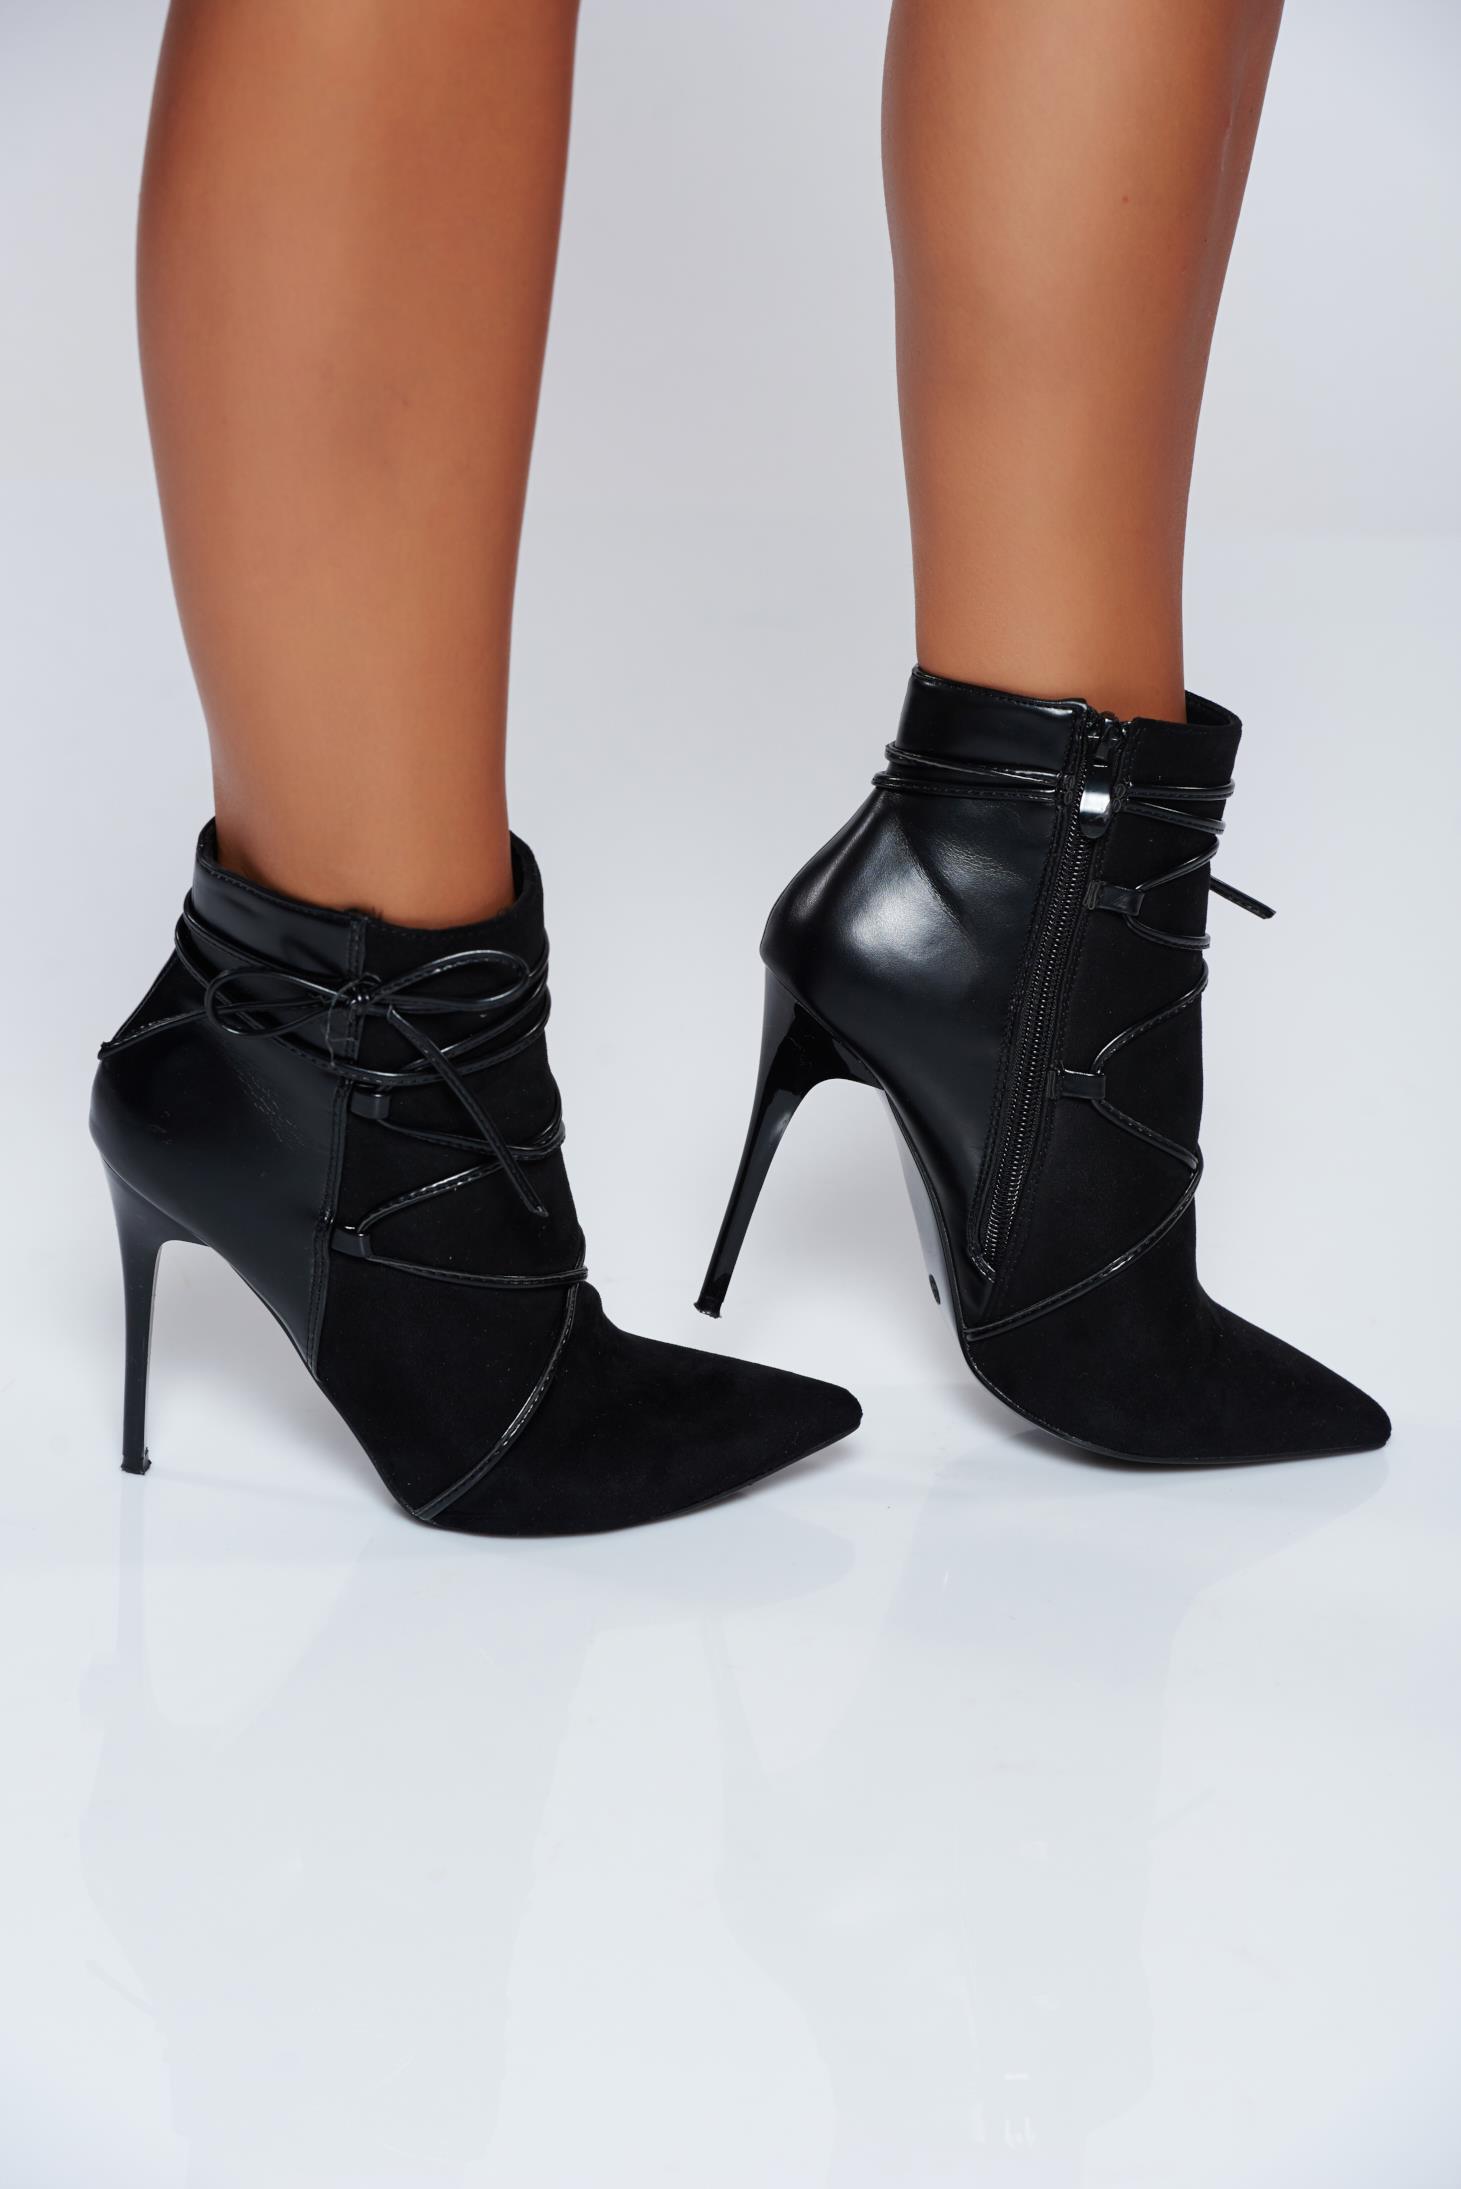 Black high heels office ankle boots 